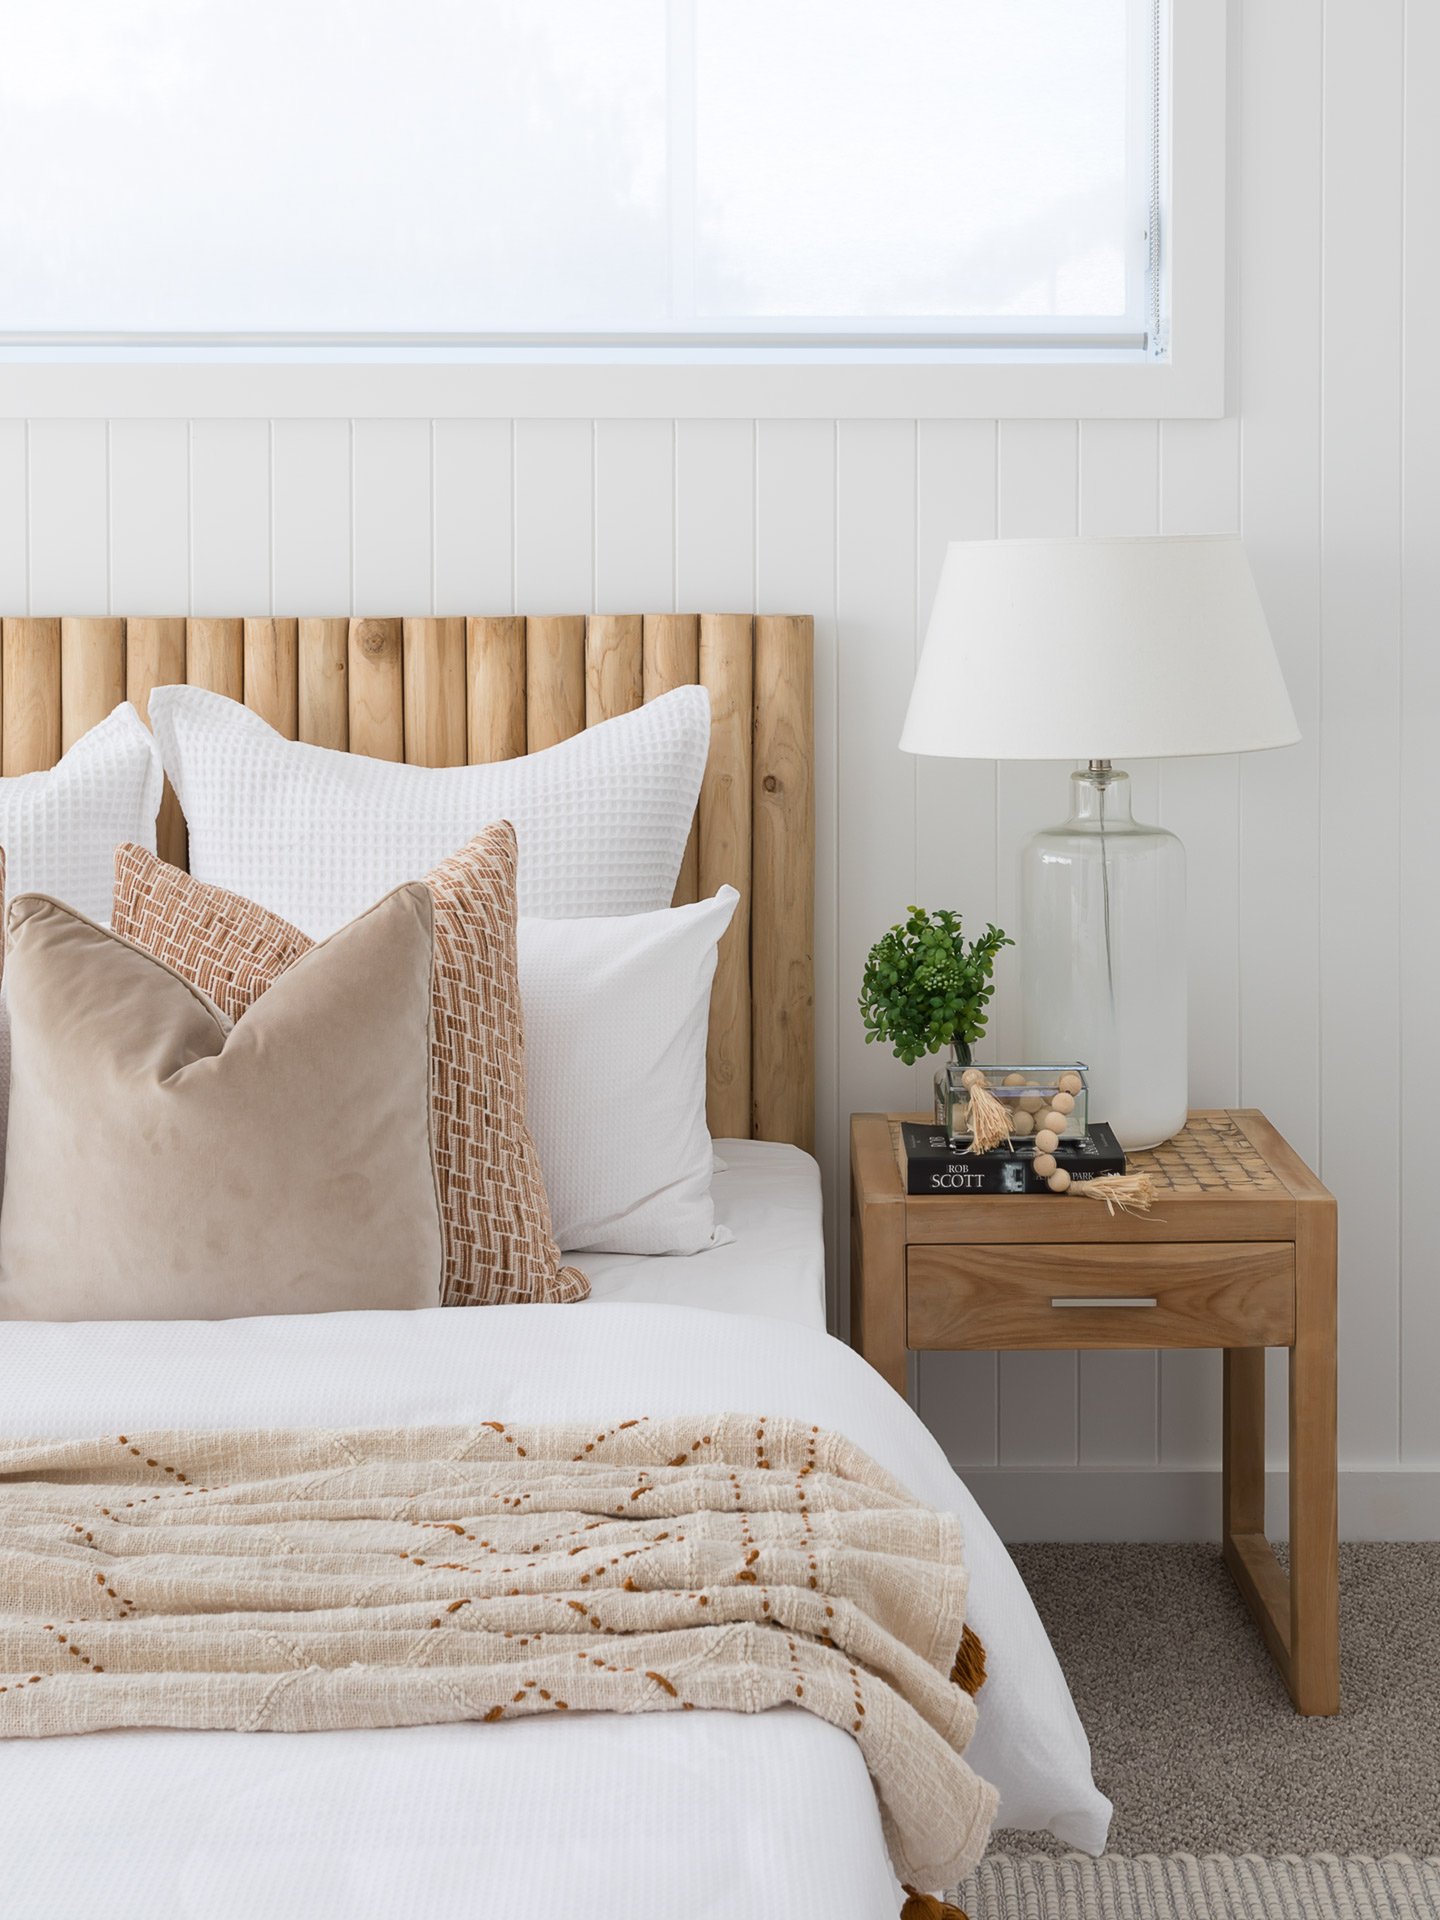  styled bed and bedside table bardon kirsten cox photographer interiors 